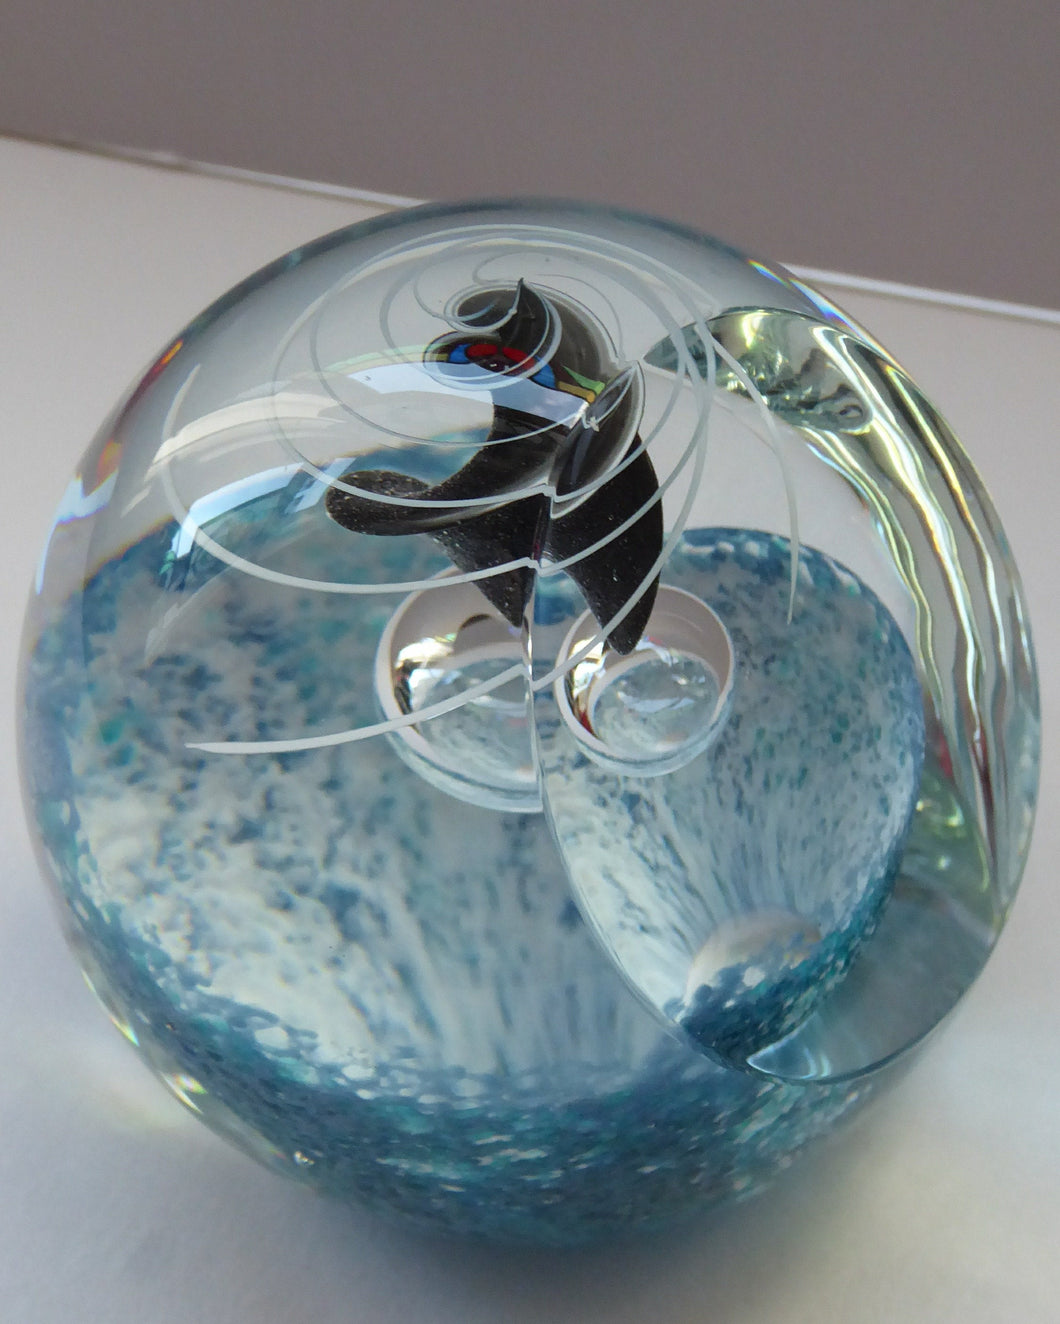 Limited Edition Caithness Glass Paperweight Entitled FREEDOM by Alastair MacIntosh. 1990